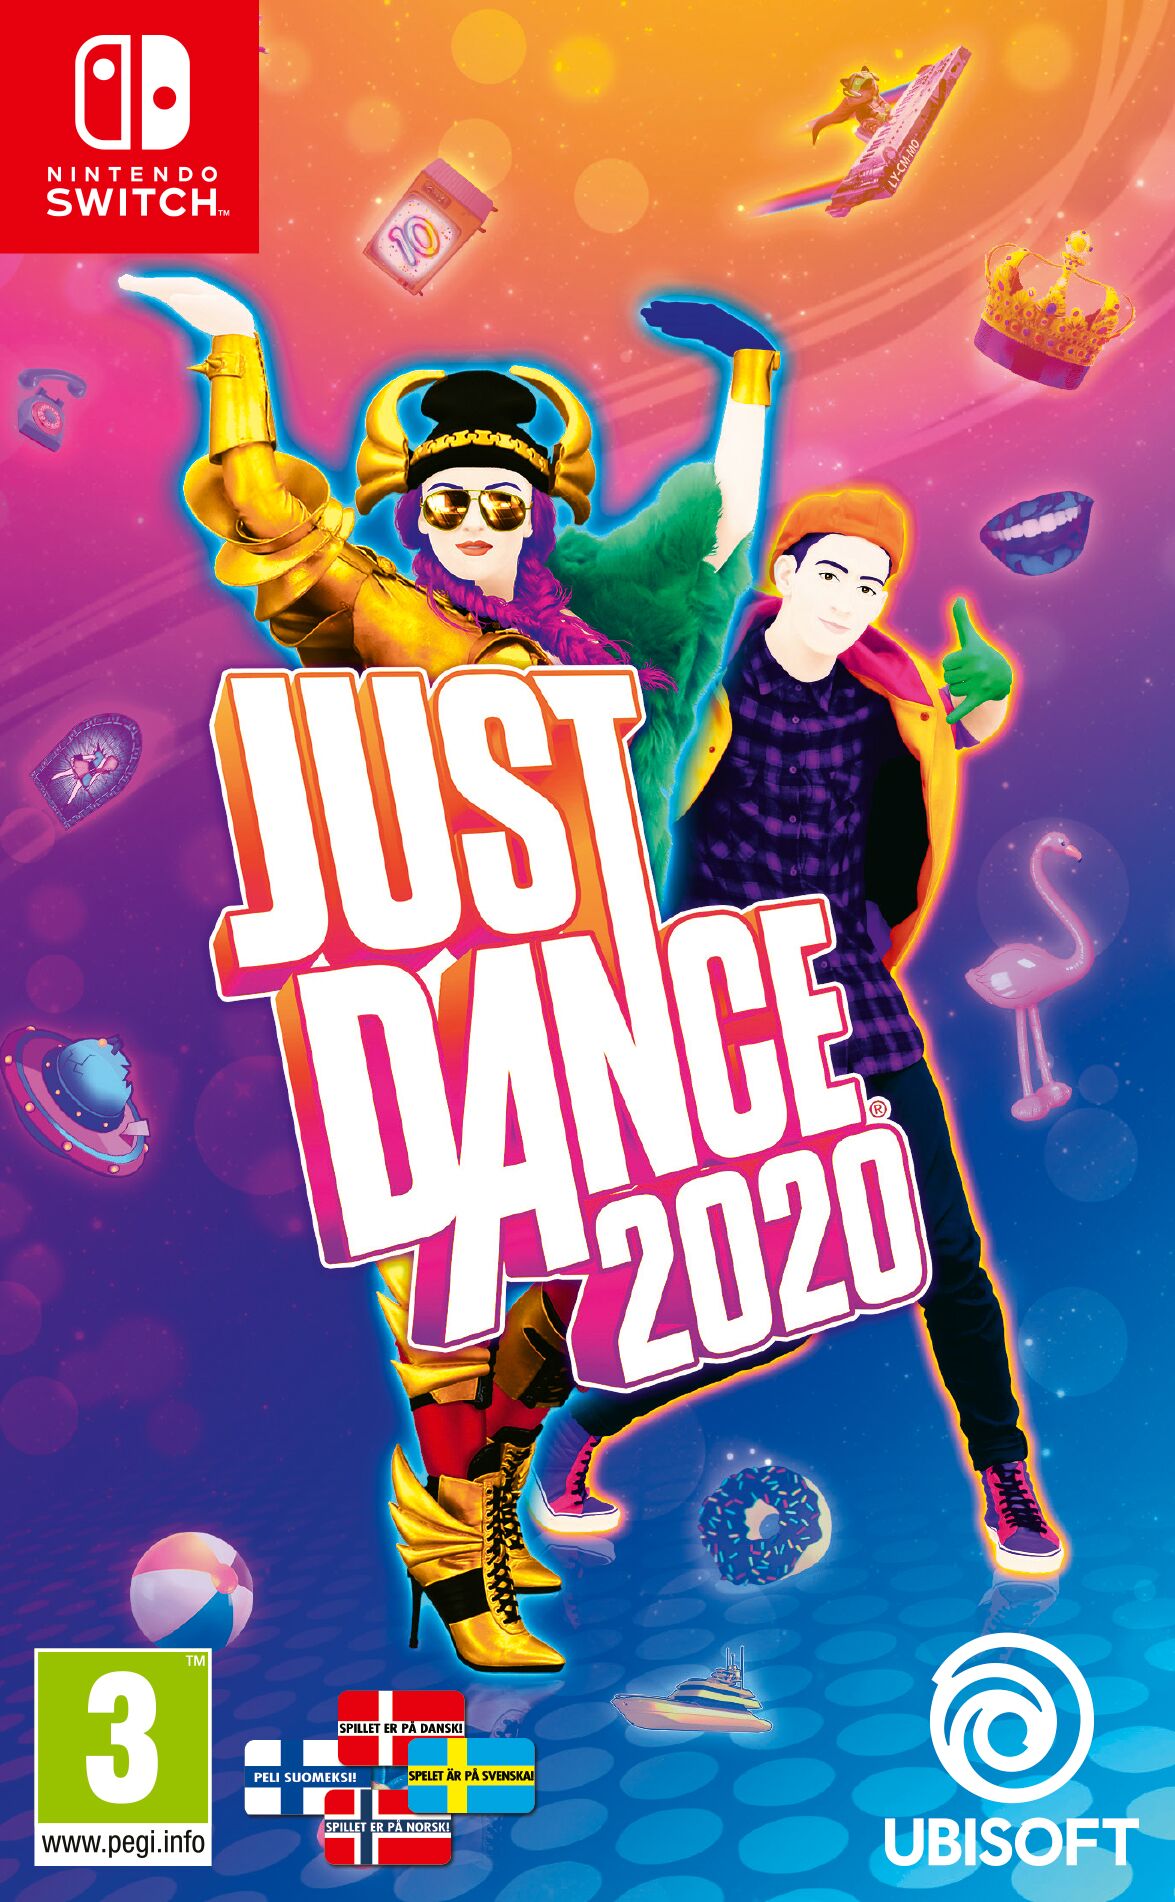 JUST DANCE 2020 GAME